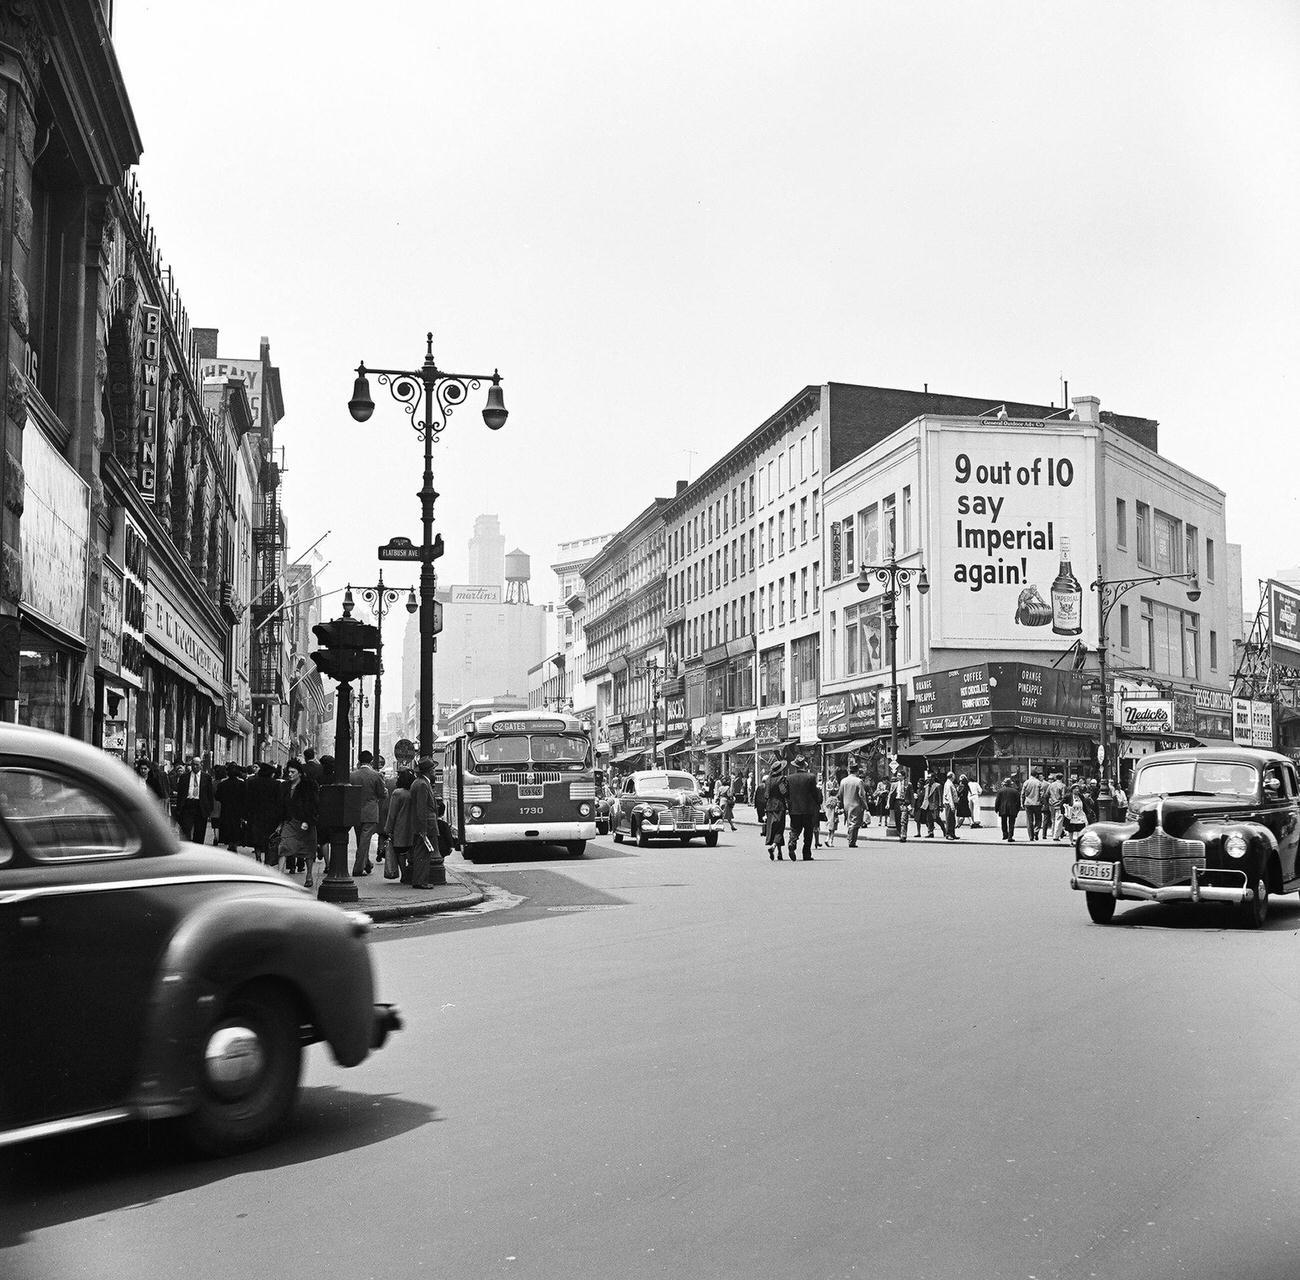 View Of Pedestrian And Street Traffic Along Fulton Street, Looking West From The Intersection With Flatbush Avenue, Brooklyn, 1948